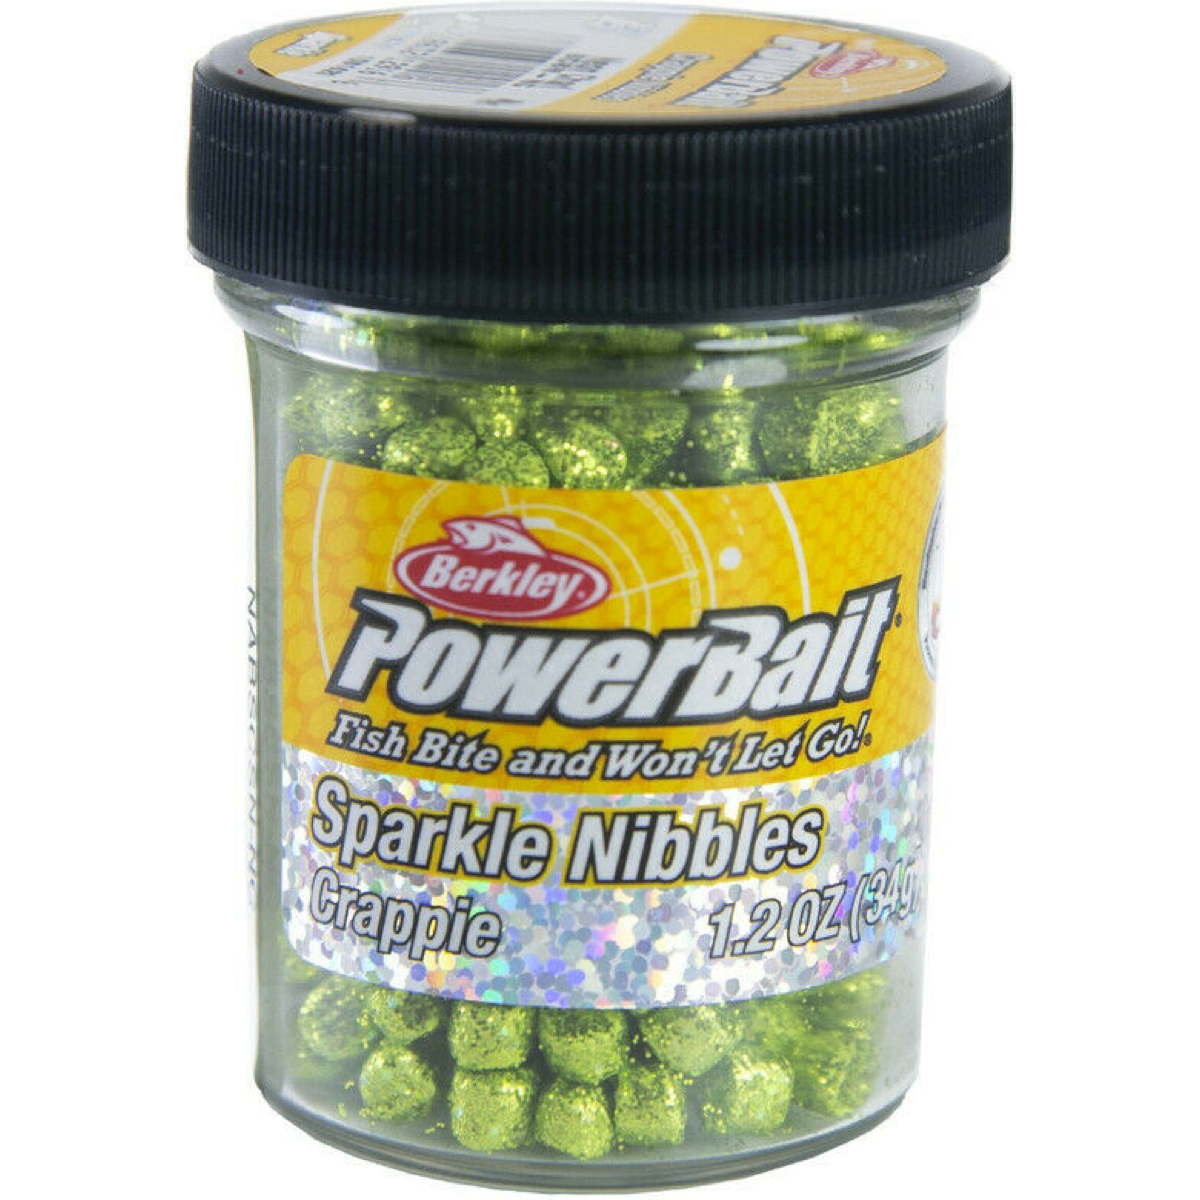 Photo of Berkley PowerBait Sparkle Crappie Nibbles for sale at United Tackle Shops.